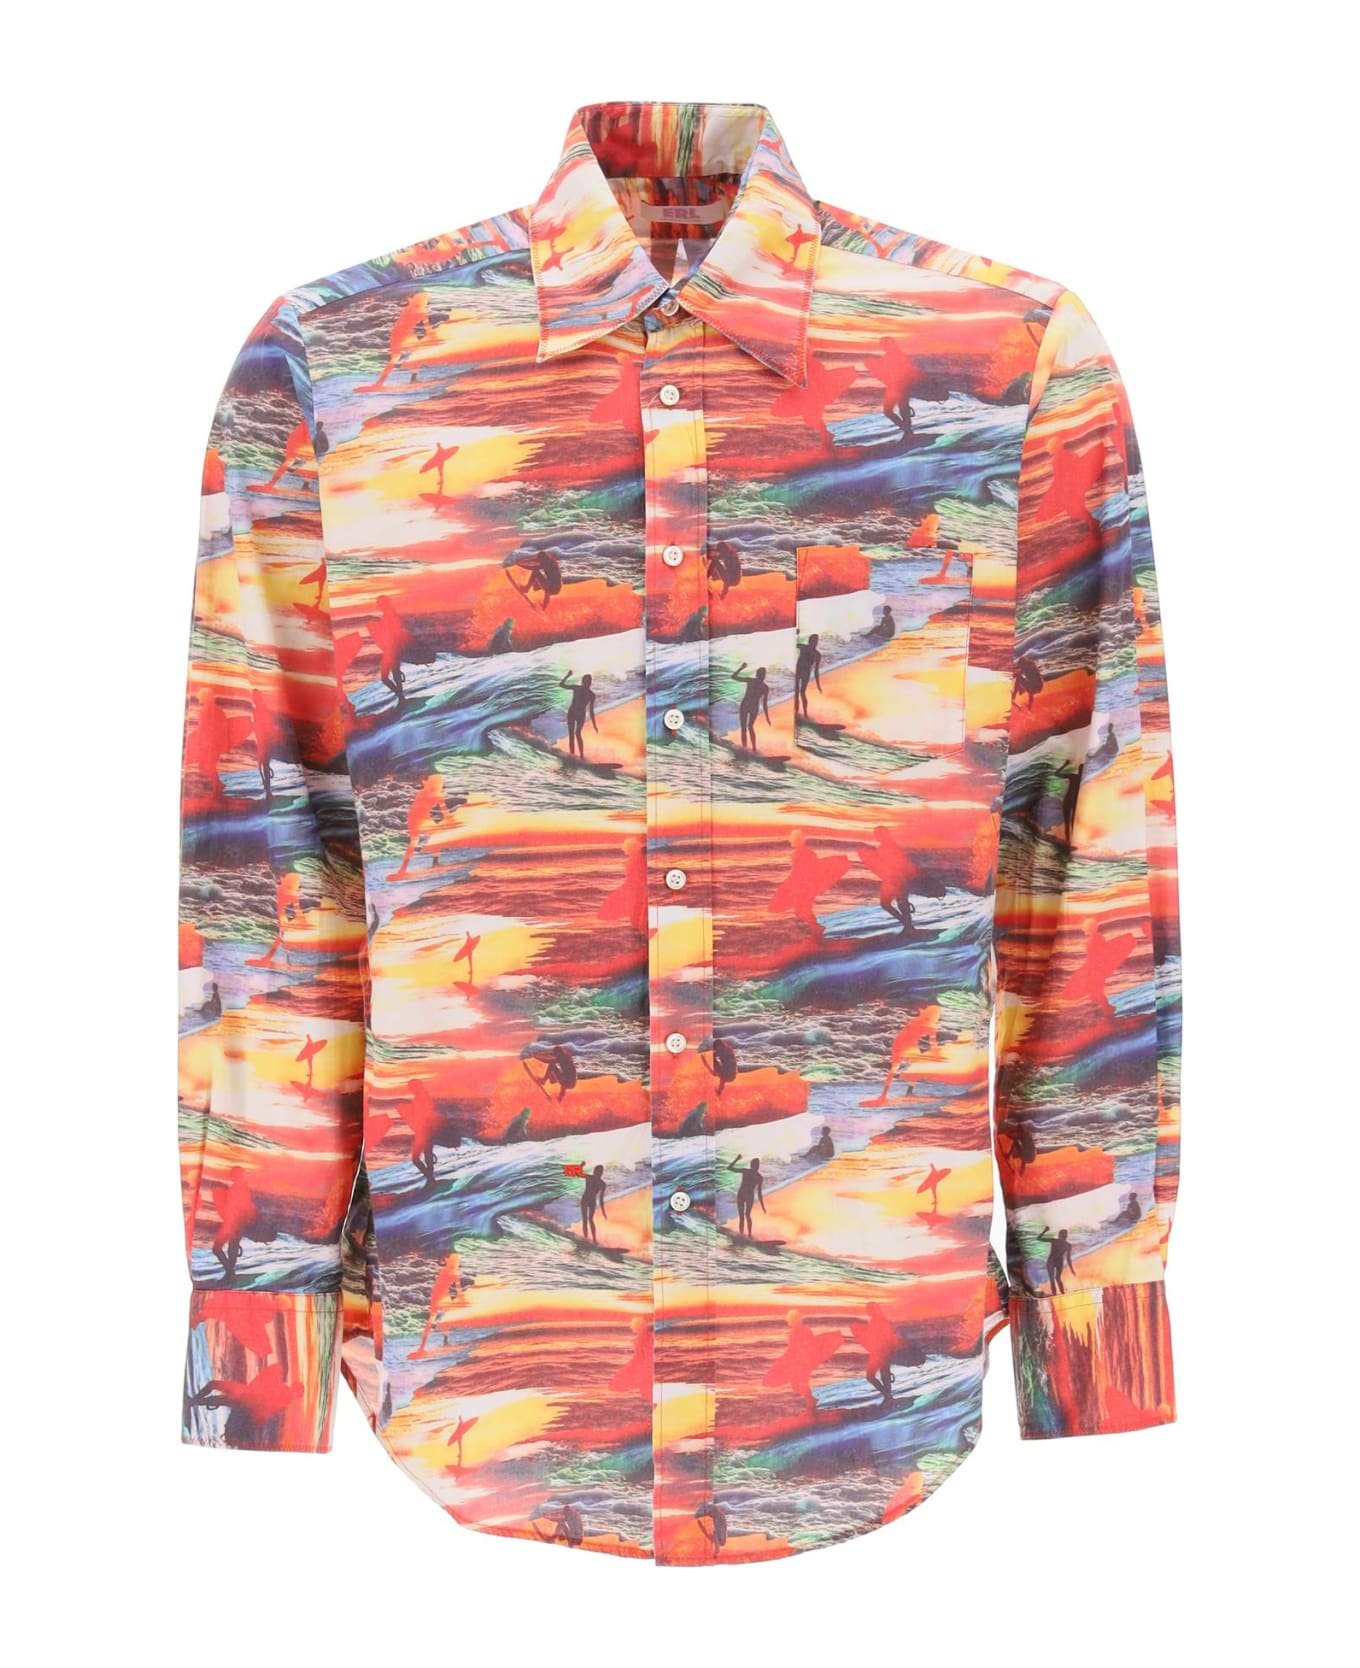 ERL Printed Cotton Shirt - ERL RED SUNSET 1